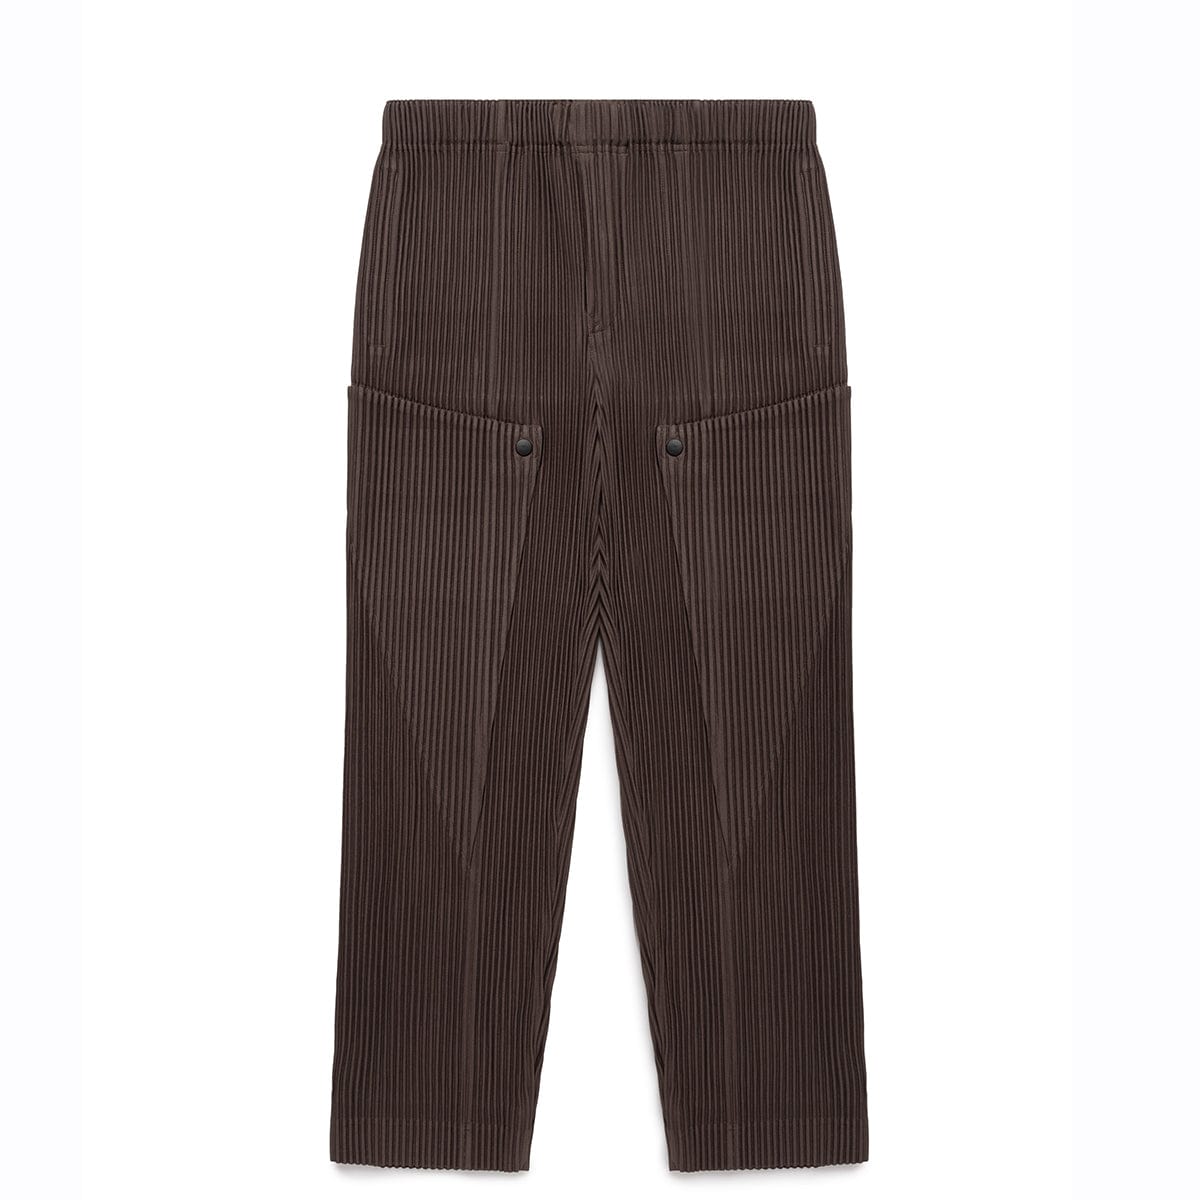 UNFOLD TROUSERS